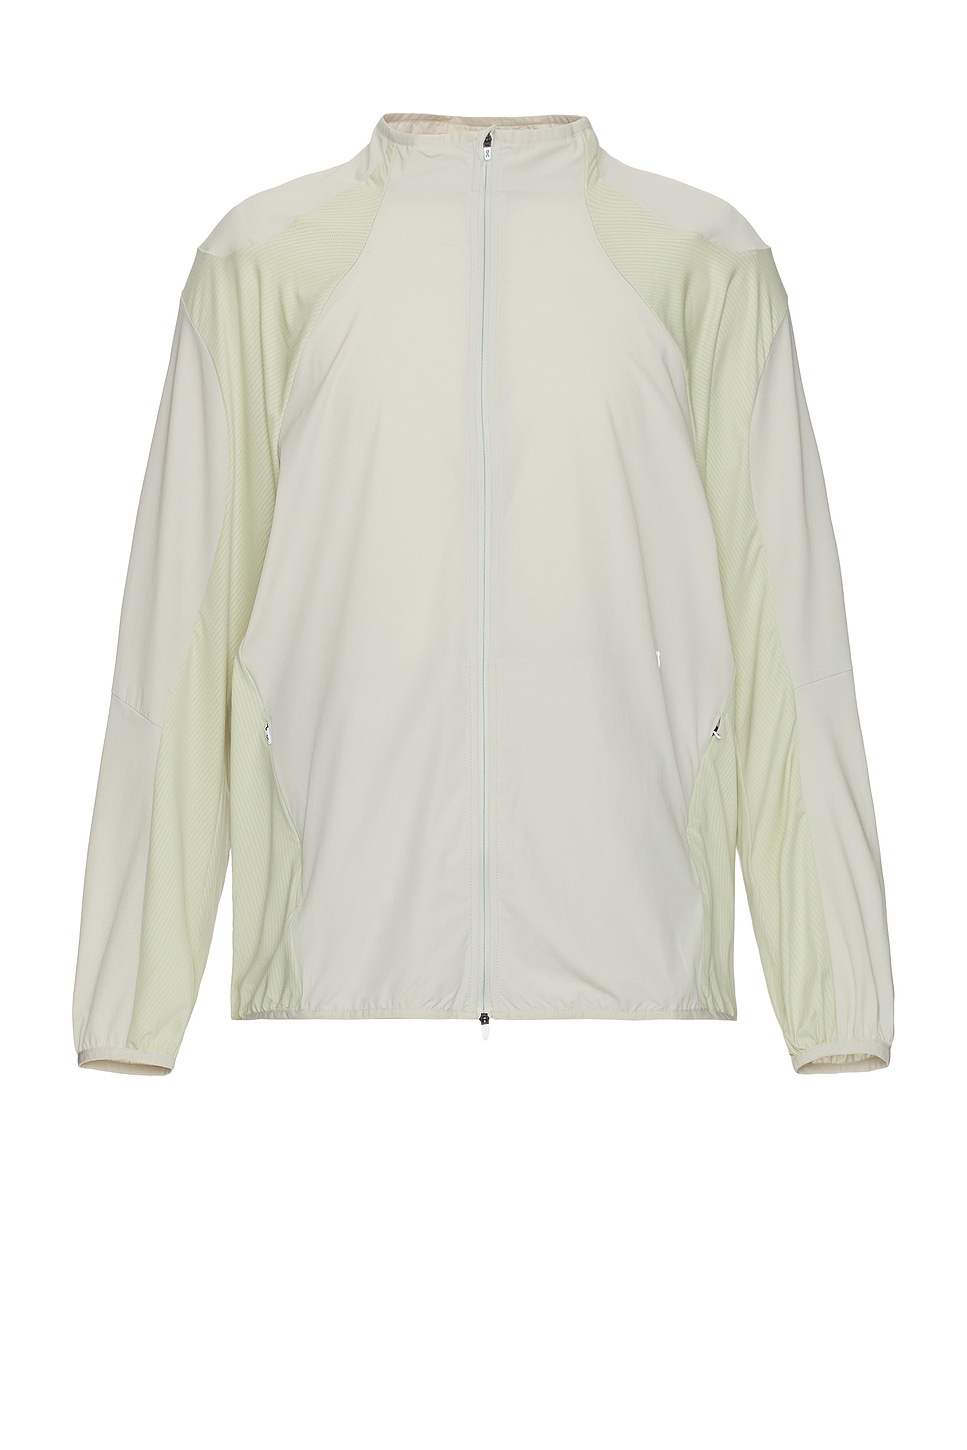 Image 1 of On x Post Archive Faction (PAF) Running Jacket in Moondust & Chalk